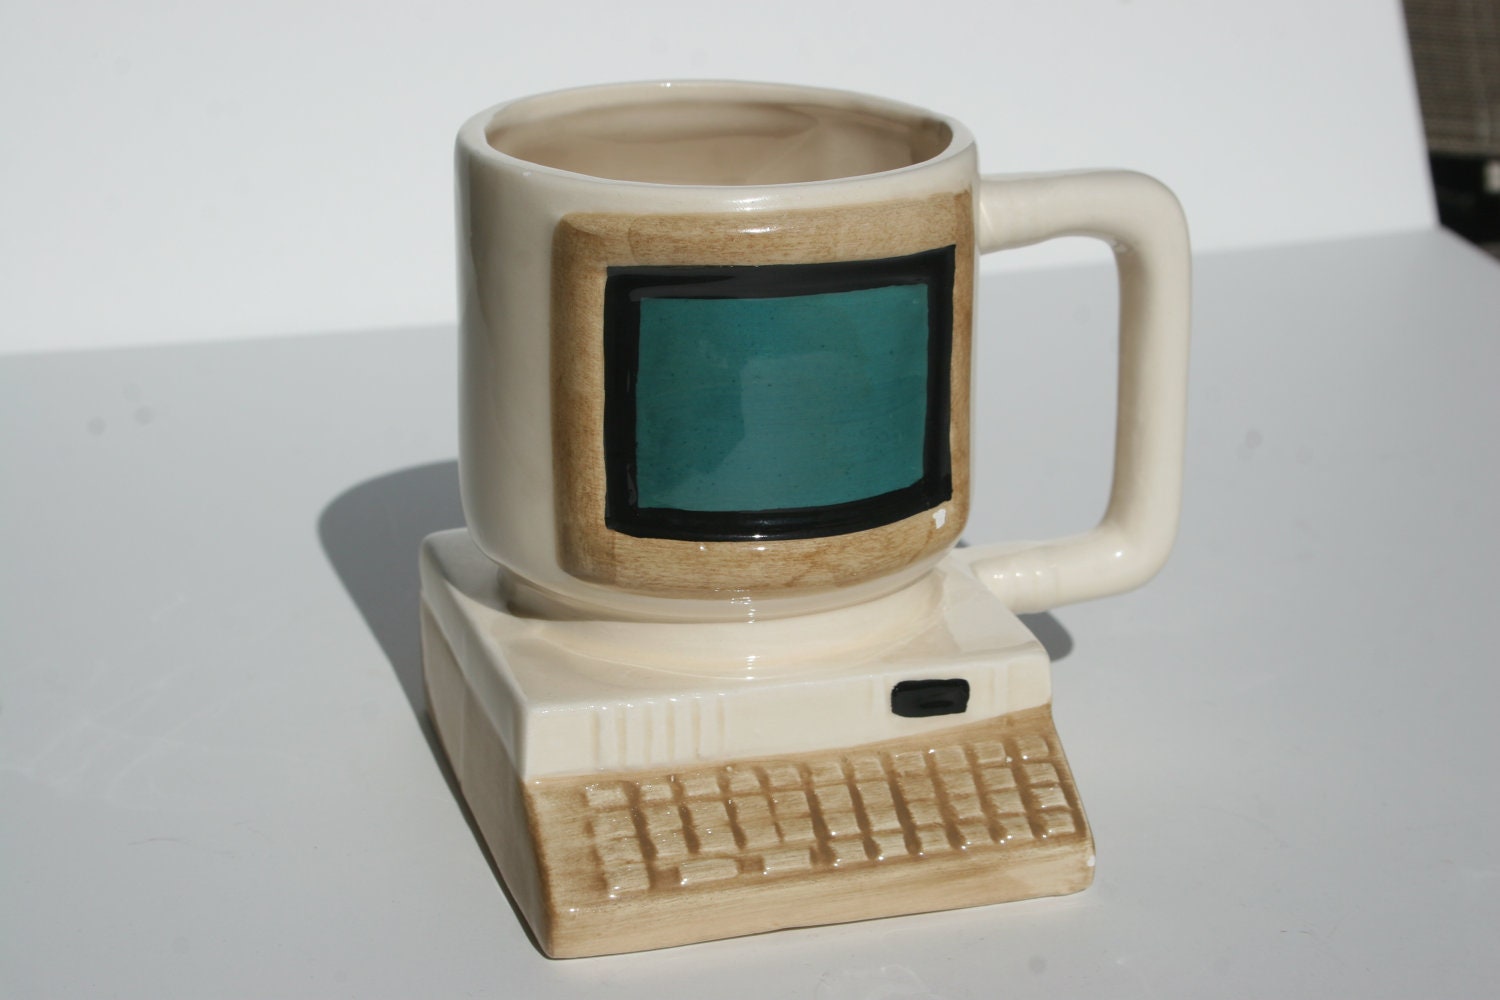 Huge Retro Vintage Computer Mug with  Keyboard Large CRT Monitor for Coffee Pens Paintbrushes or Air Plants in Blue Black Brown